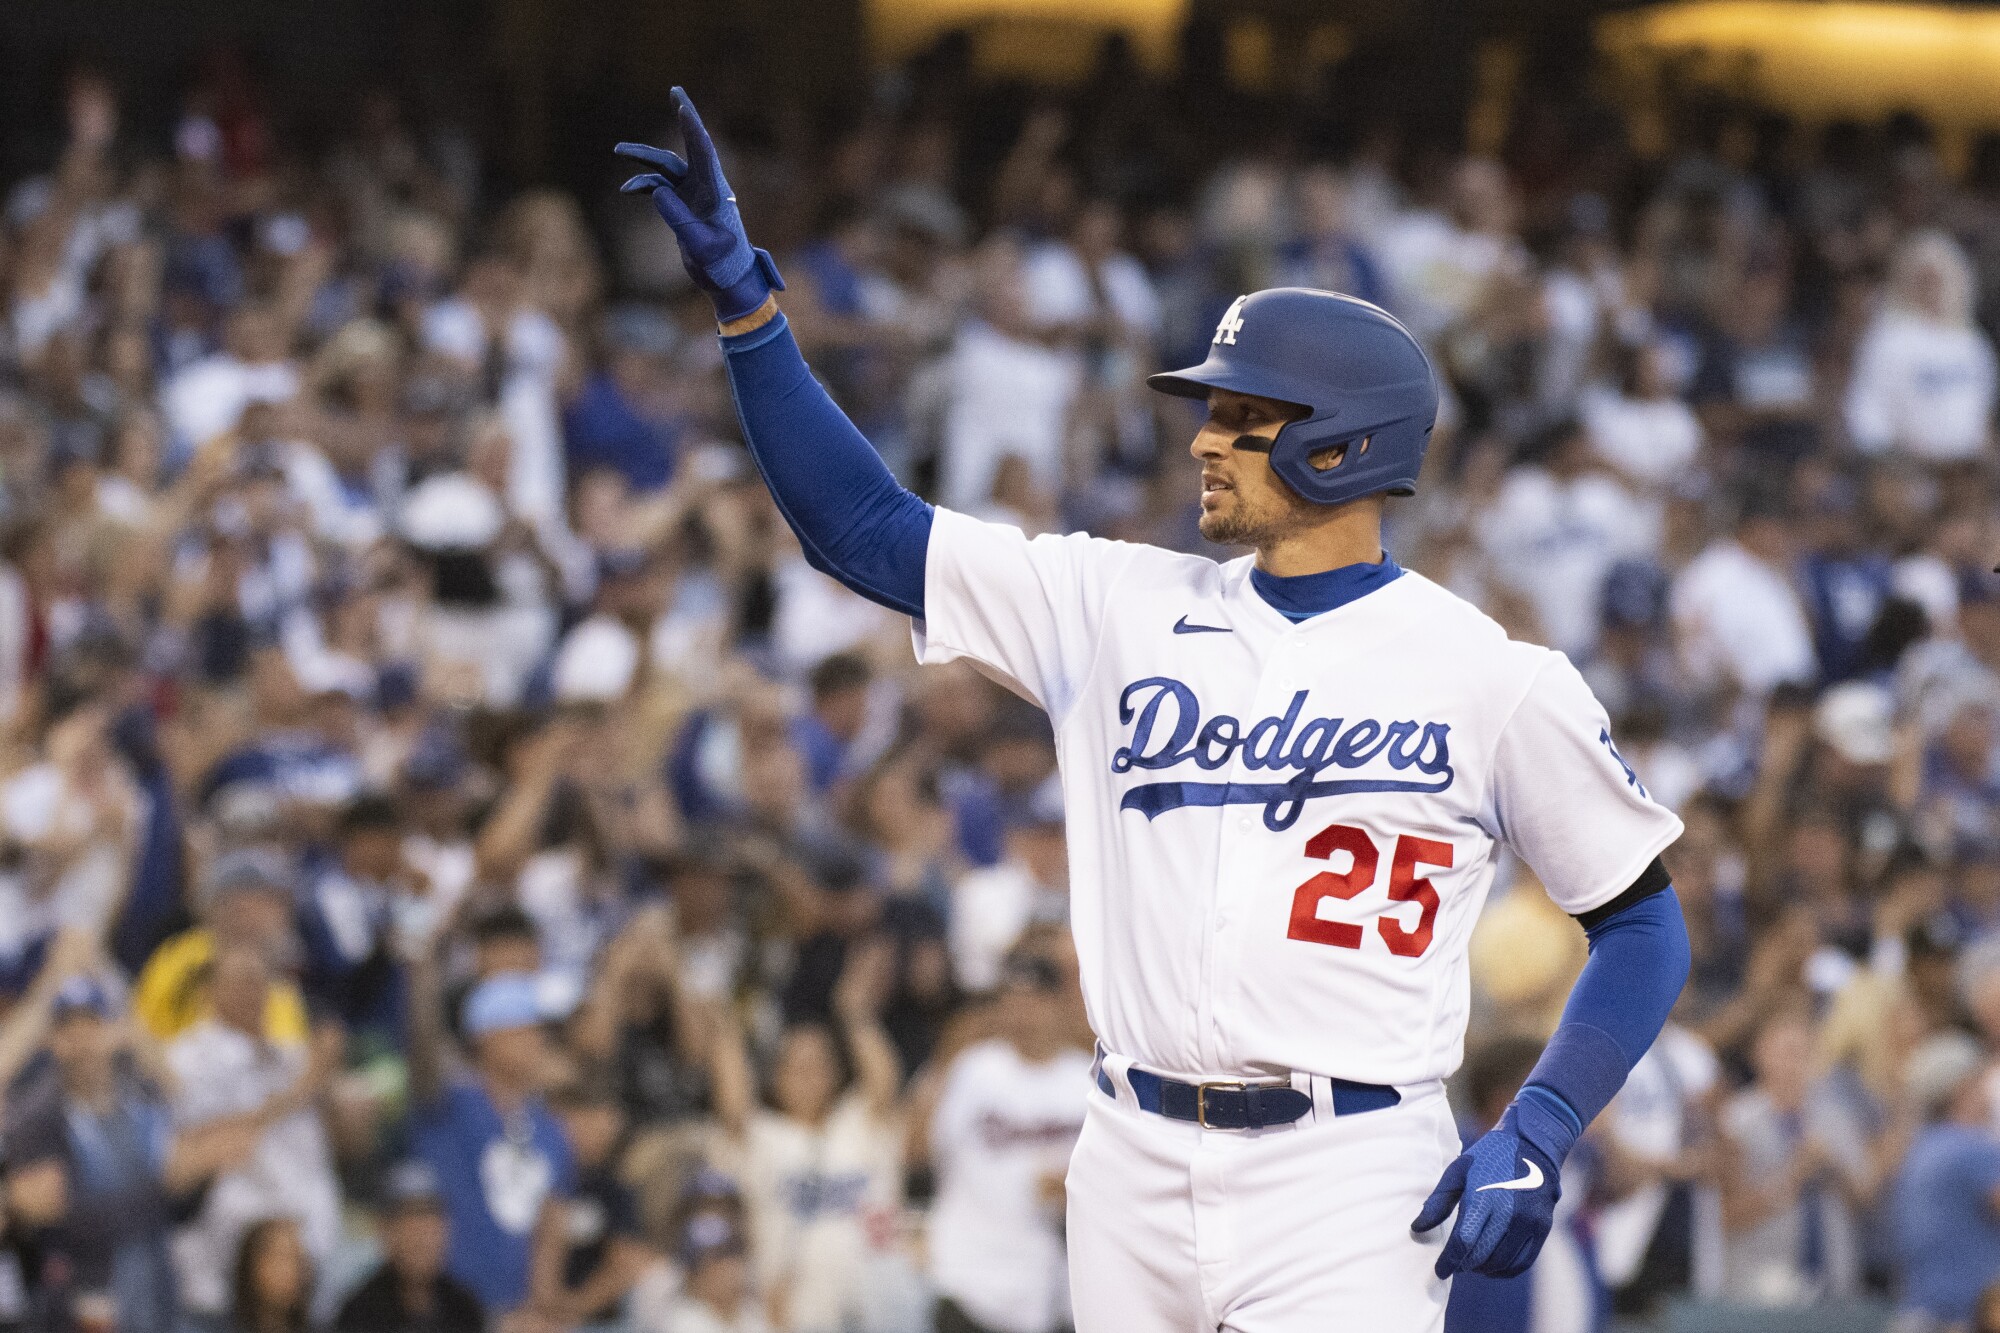 Dodgers' Trayce Thompson points to the stands after hitting a three-run home run.